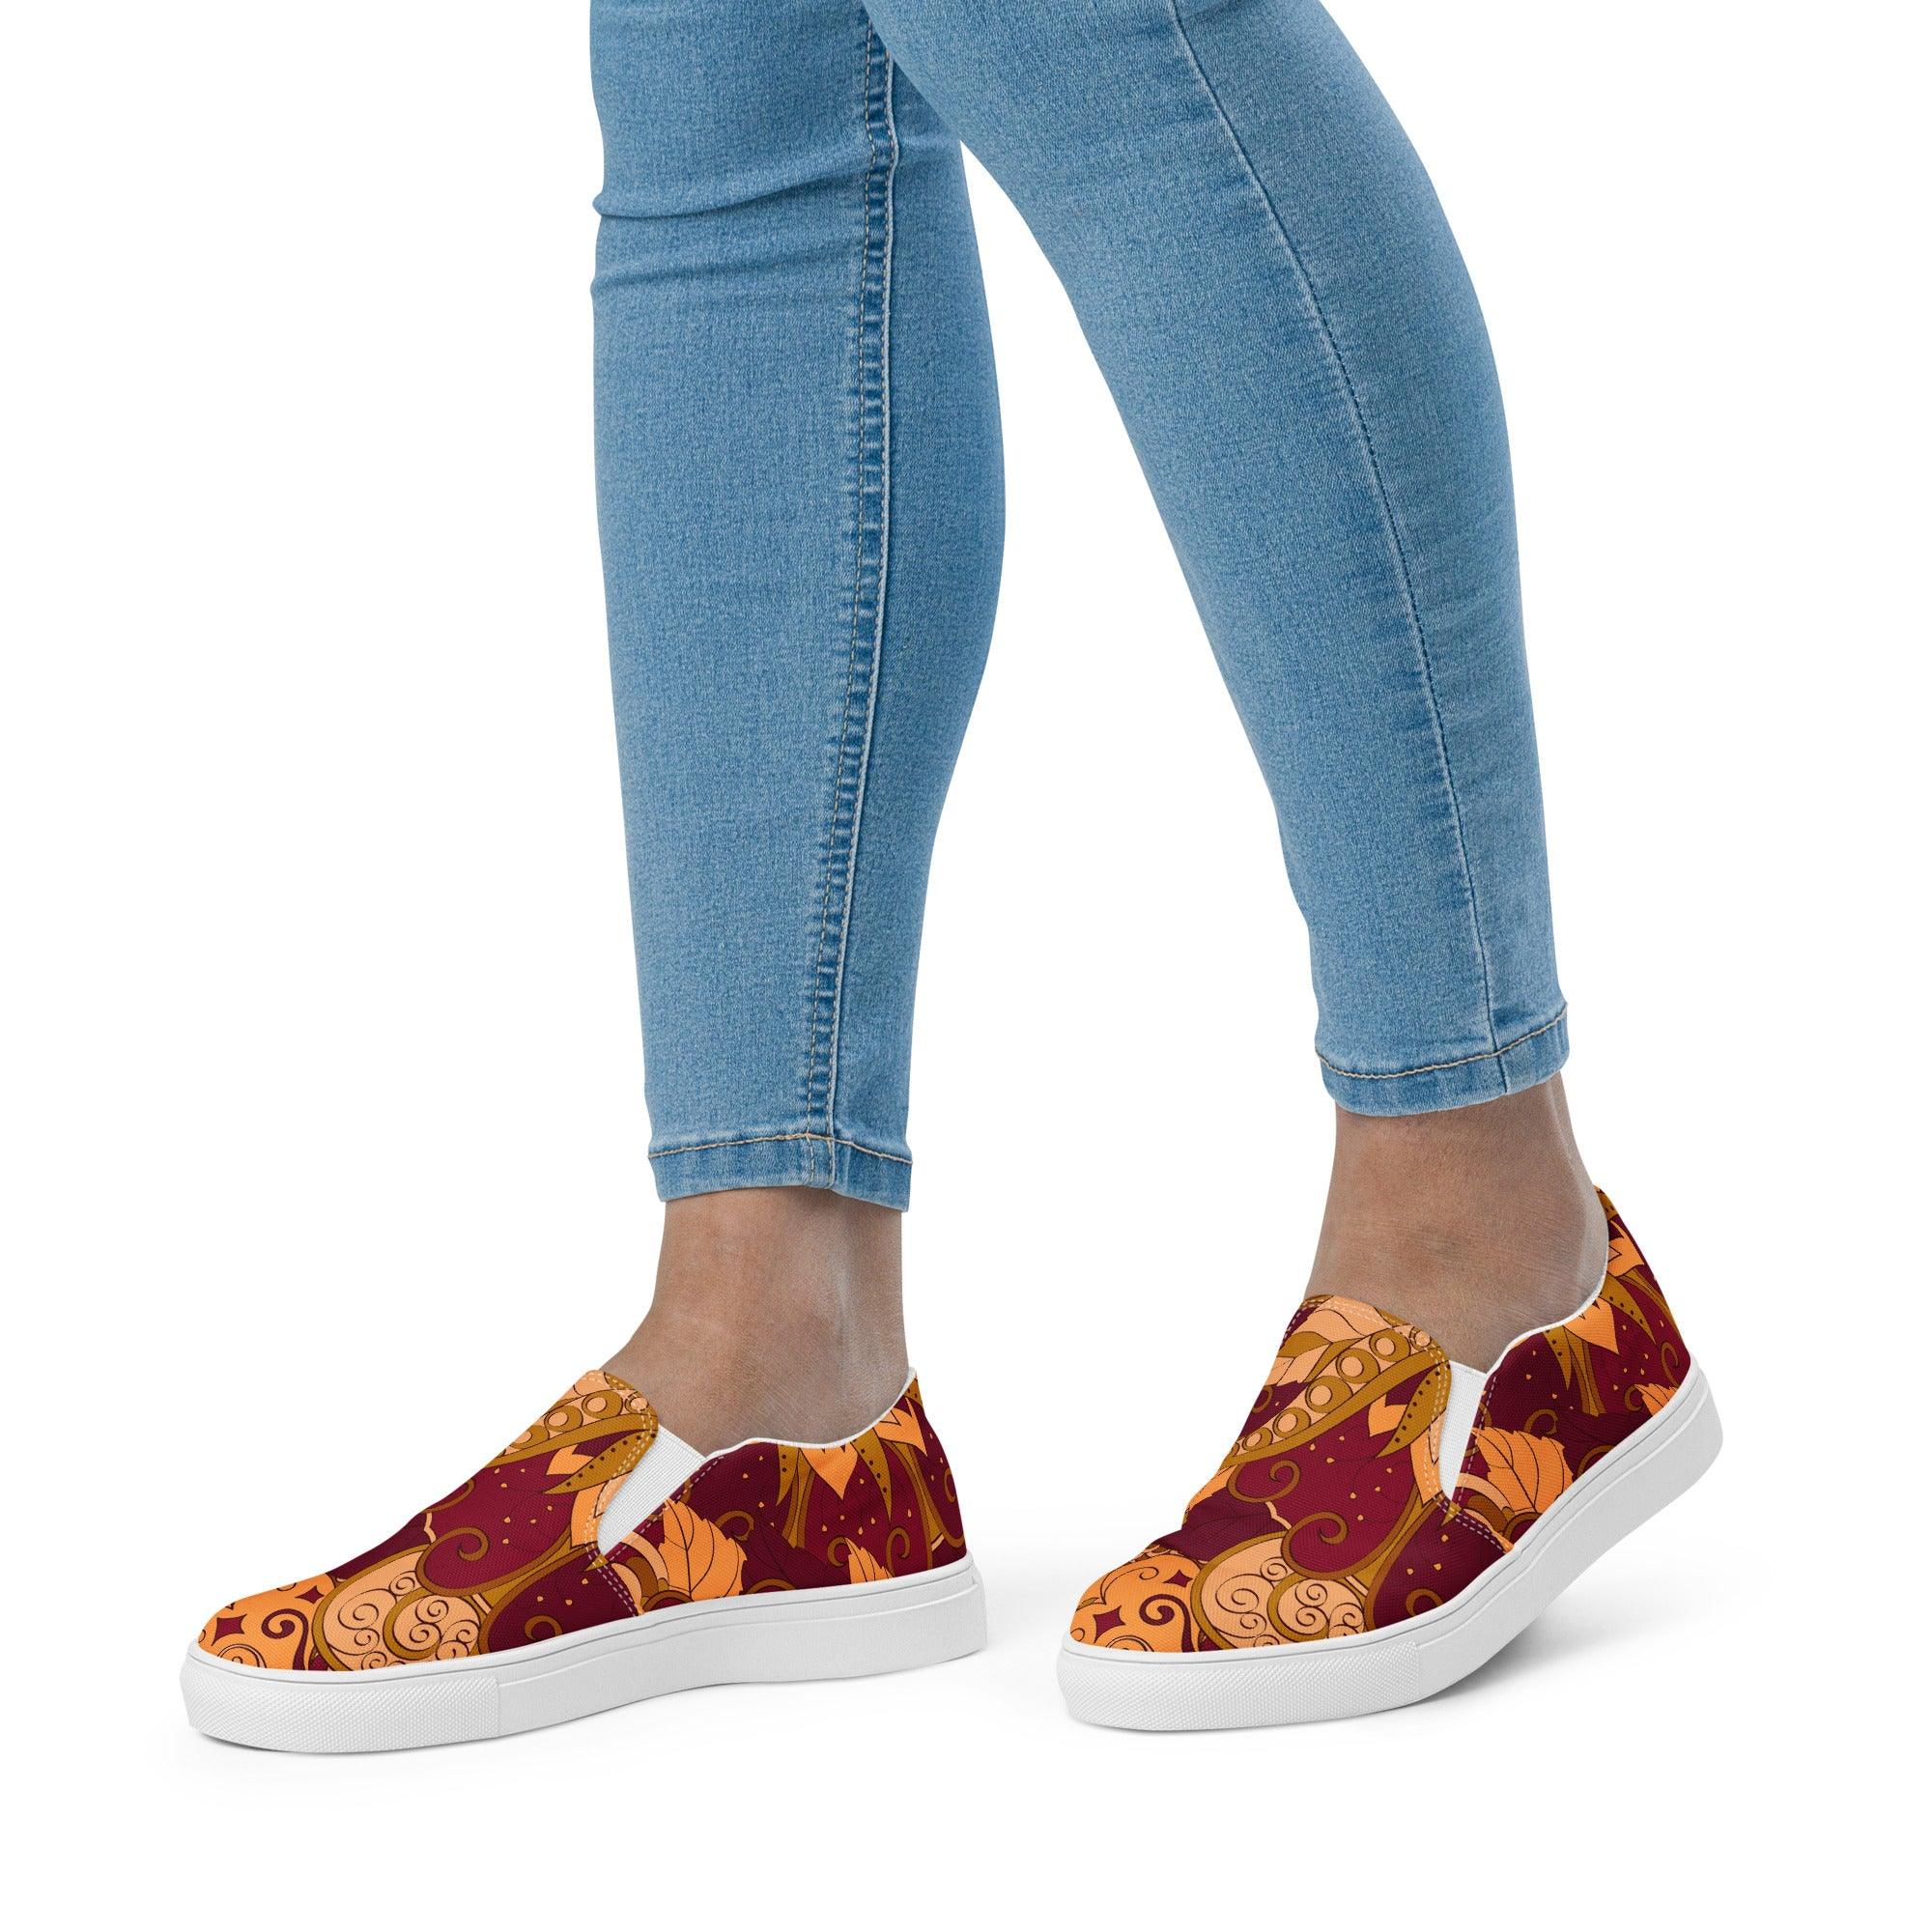 Renai Slip On Canvas Women's Sneakers - All Over Abstract Psychedelic Retro Paisley Floral Print -  Flower Power - Bold Vibrant Womens Shoes - Boho